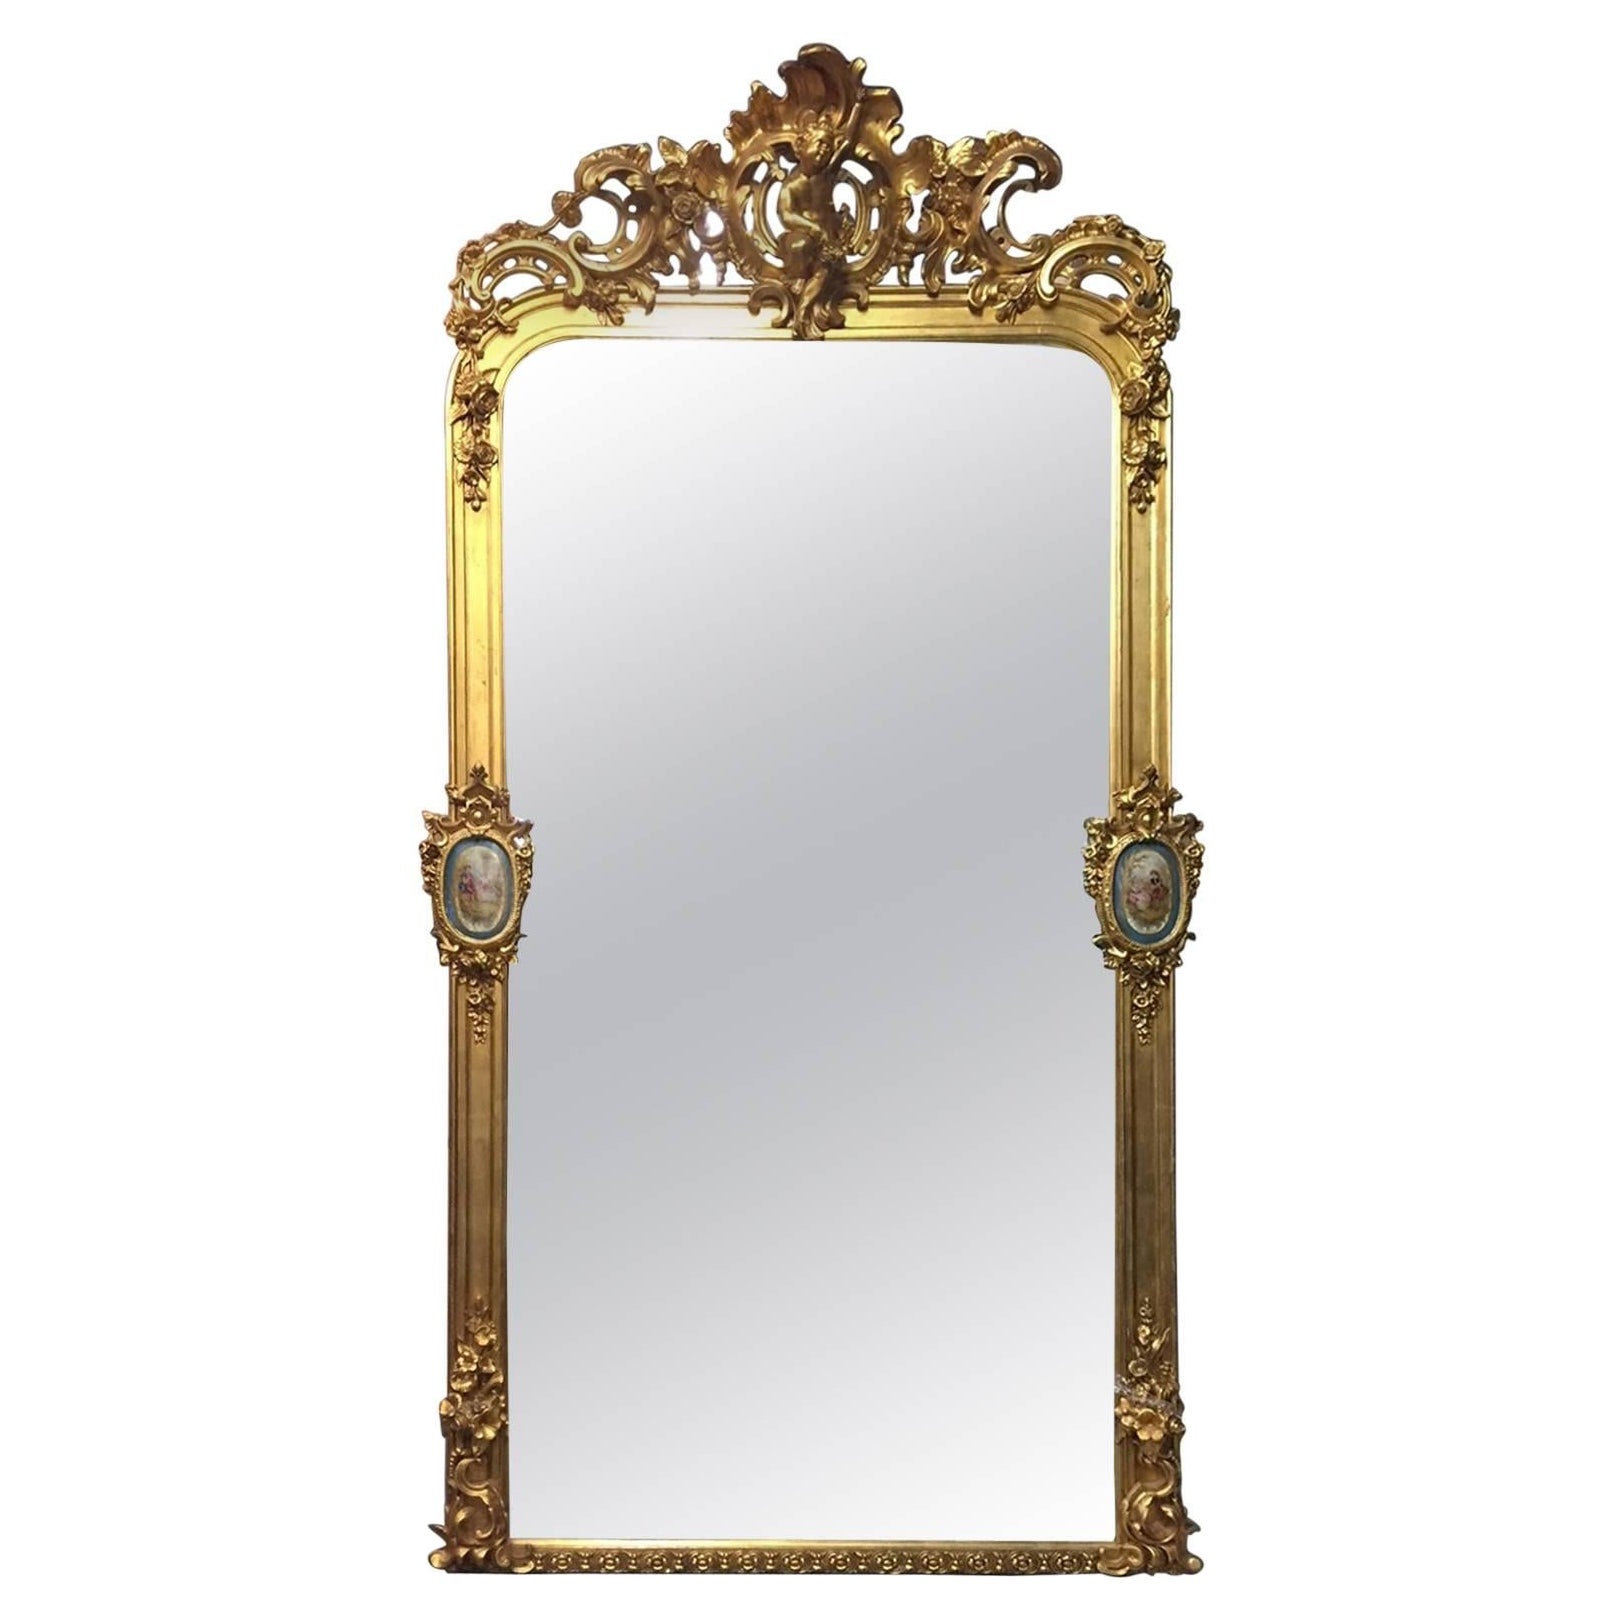 French Gilt Mirror with Sèvres Porcelain Plaques, 19th Century For Sale